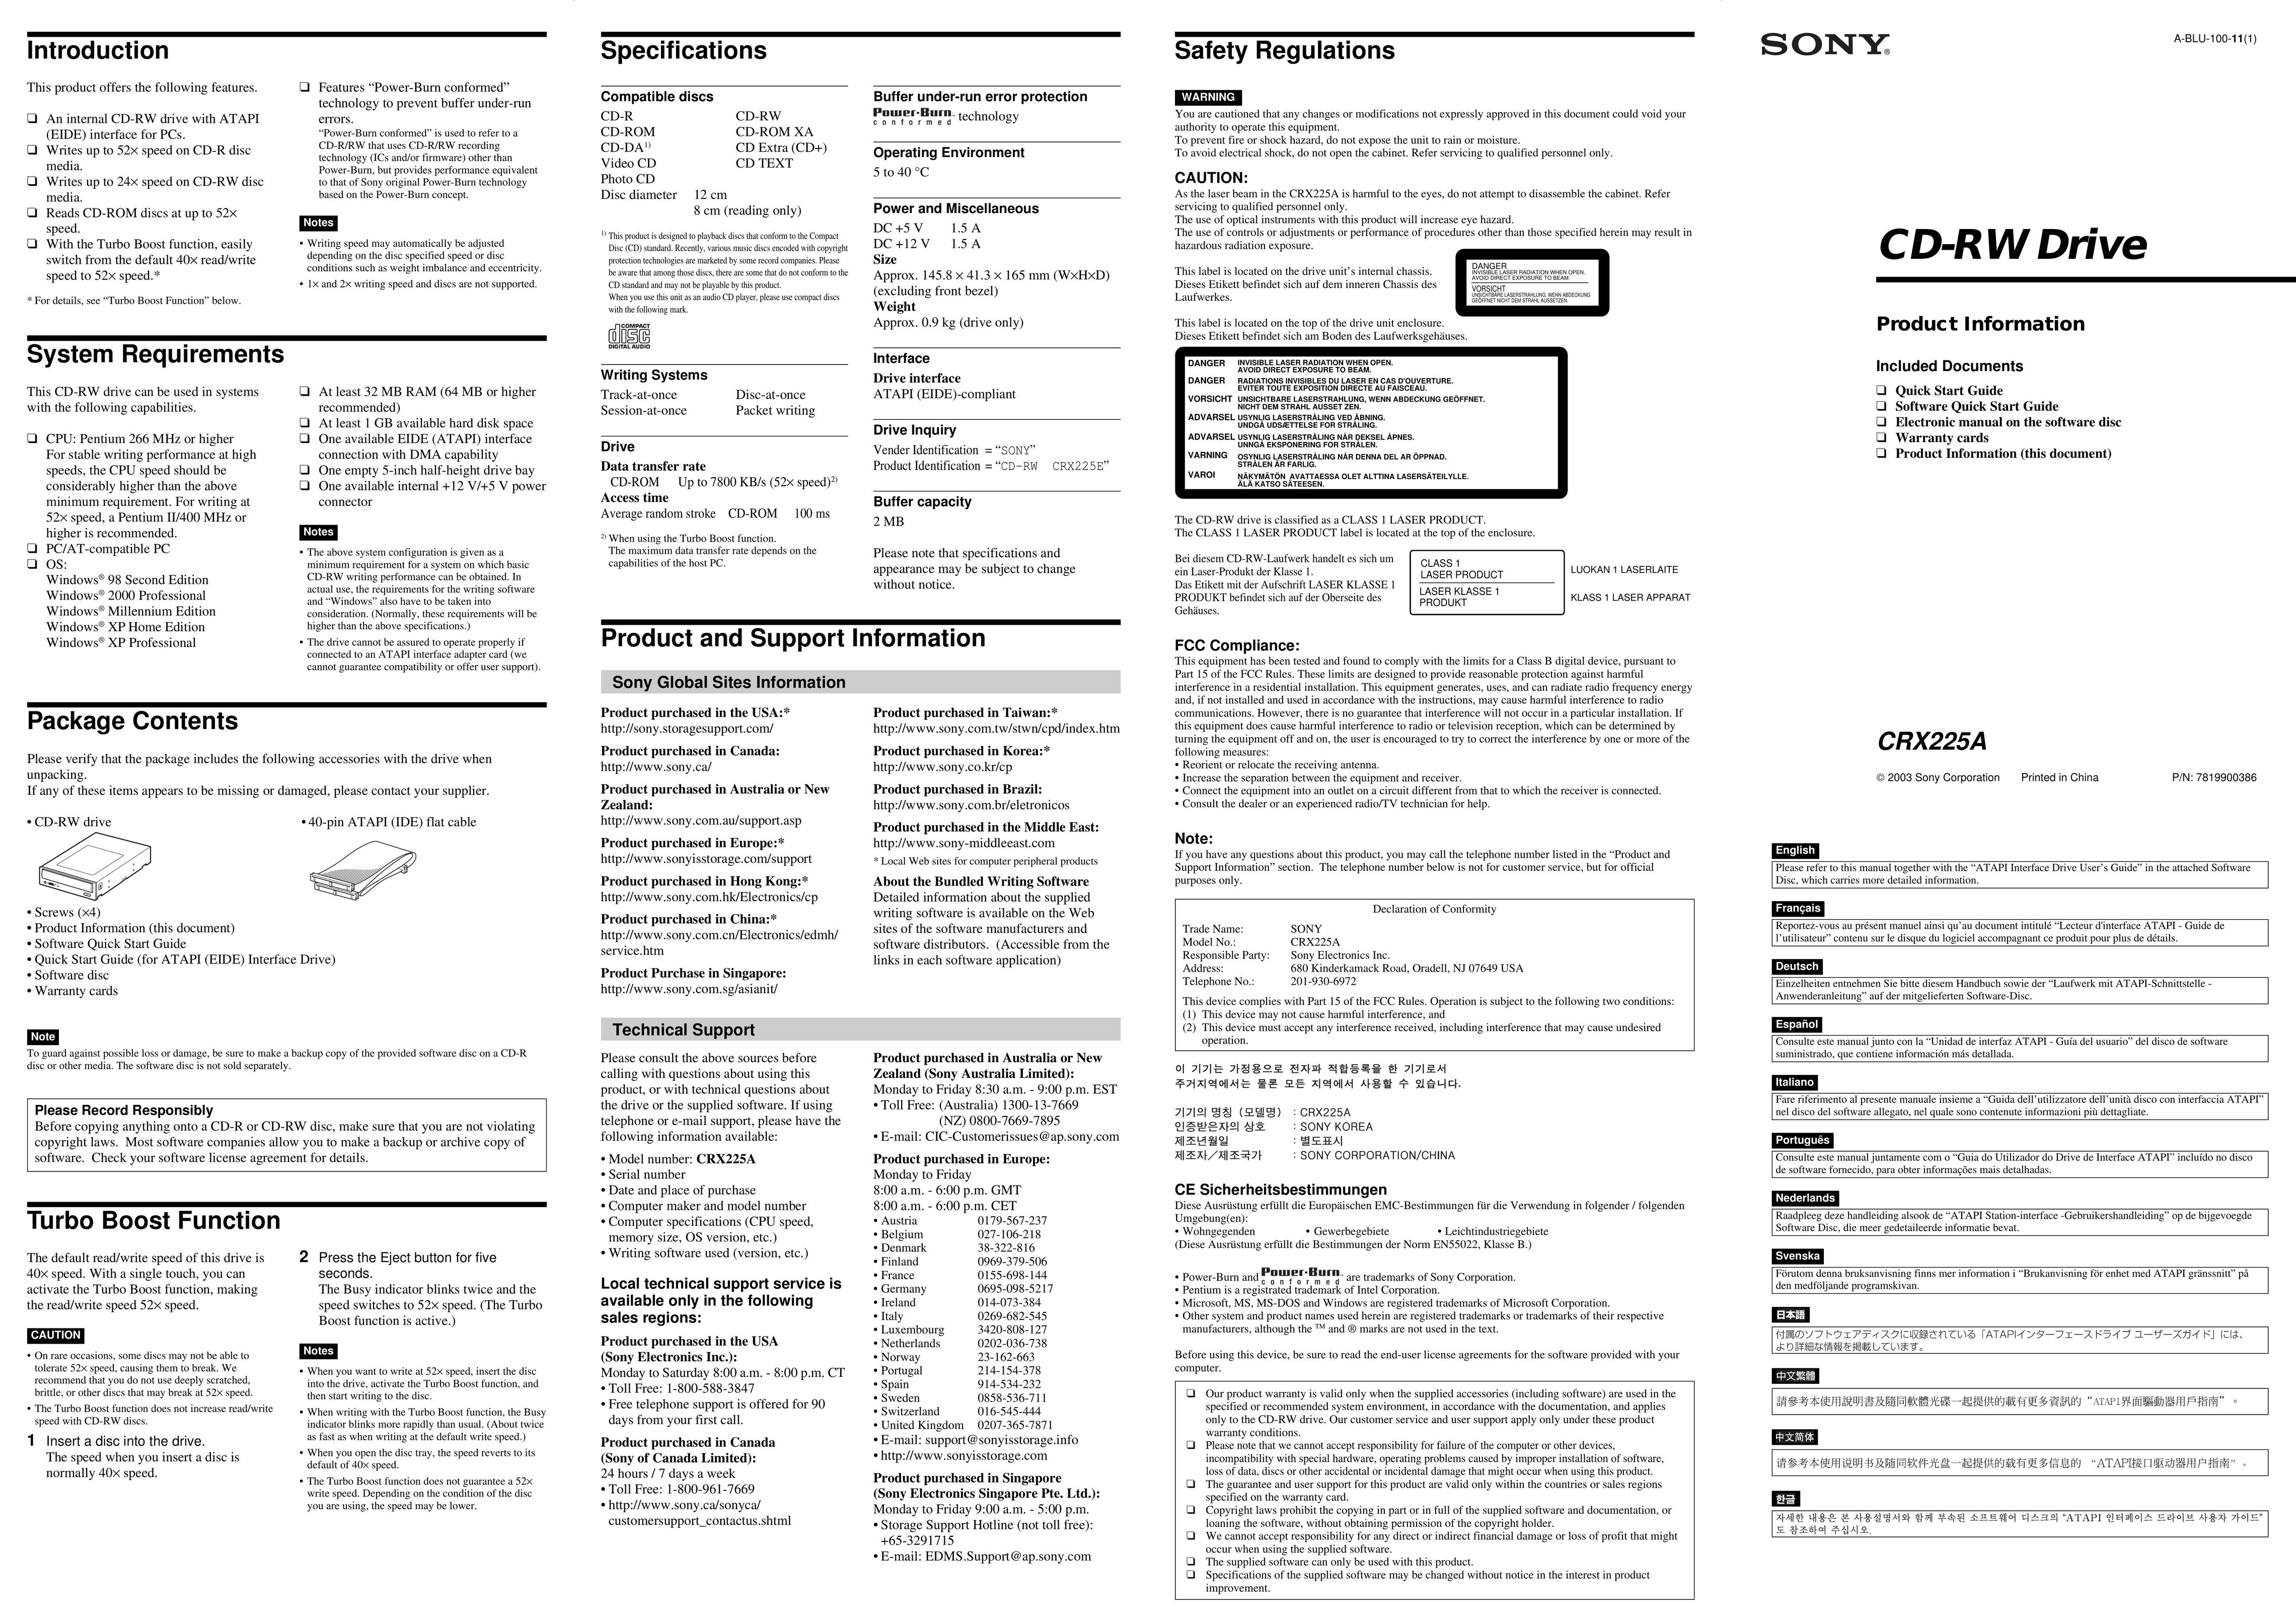 Sony CRX225A Computer Drive User Manual